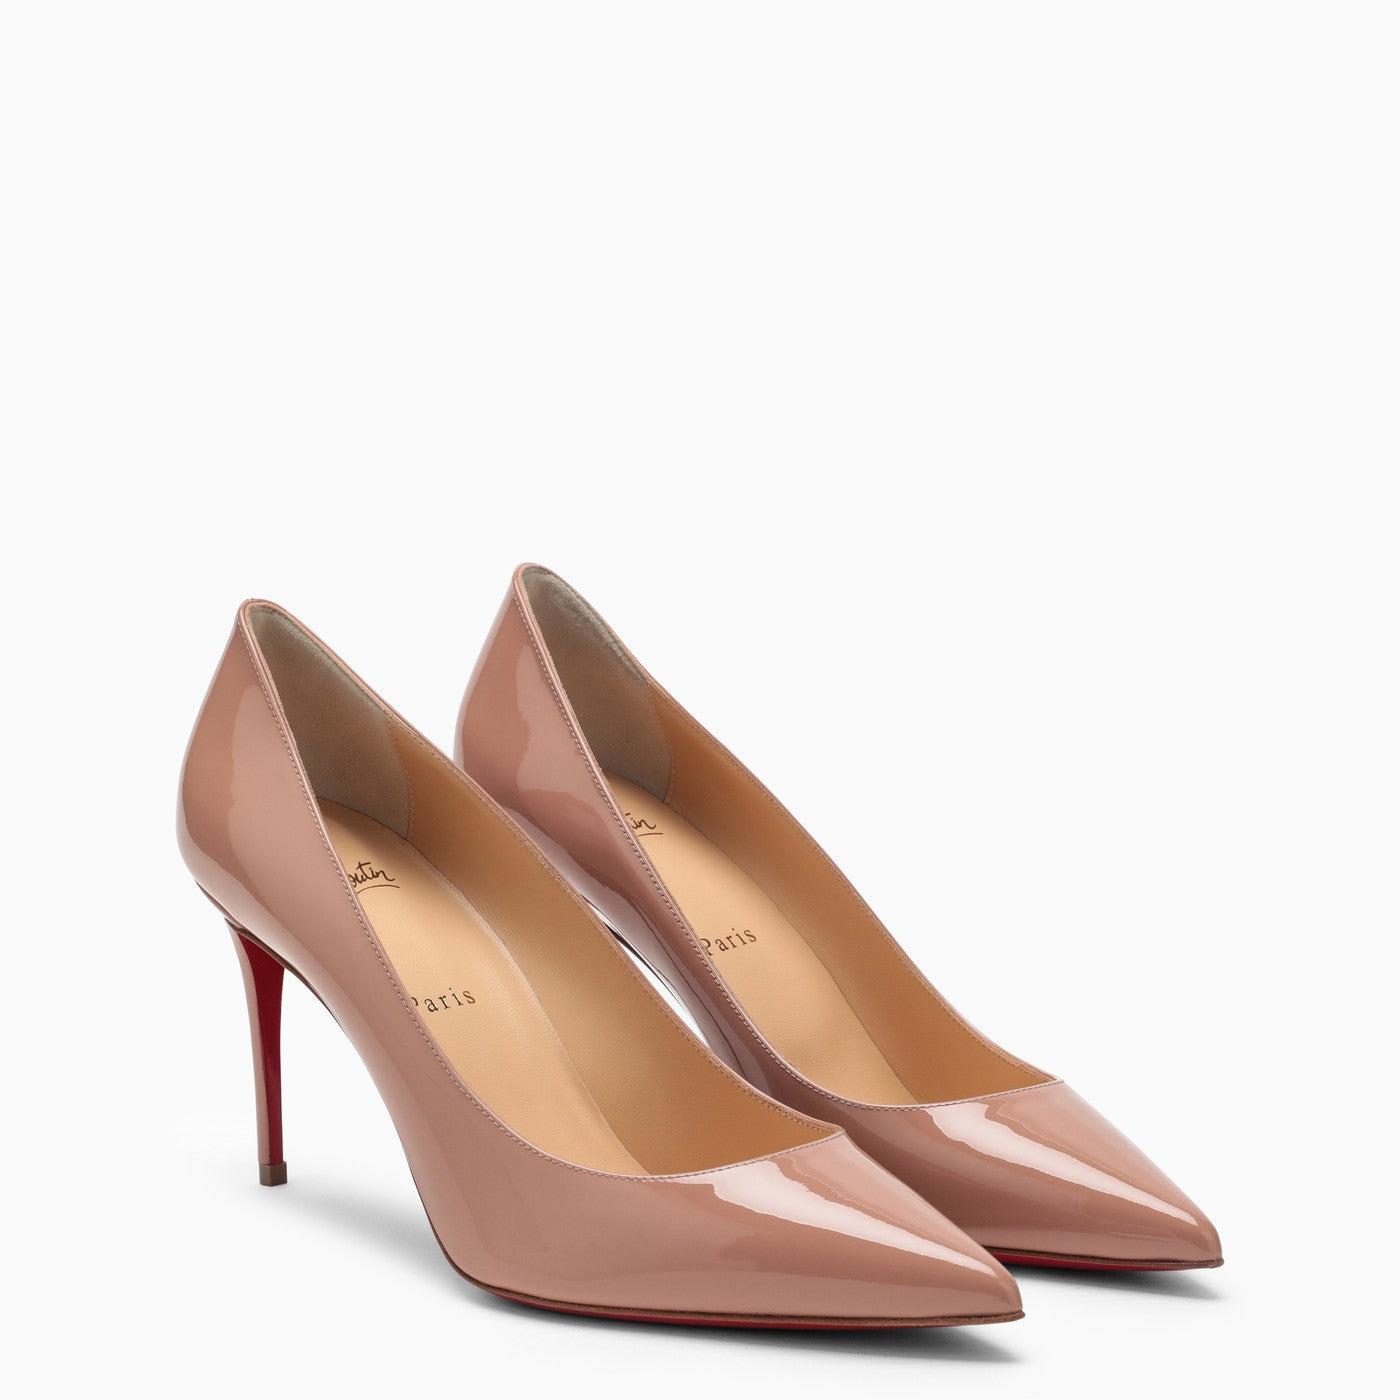 Christian Louboutin Patent Leather Pigalle 85 Pumps - Size 9 / 39